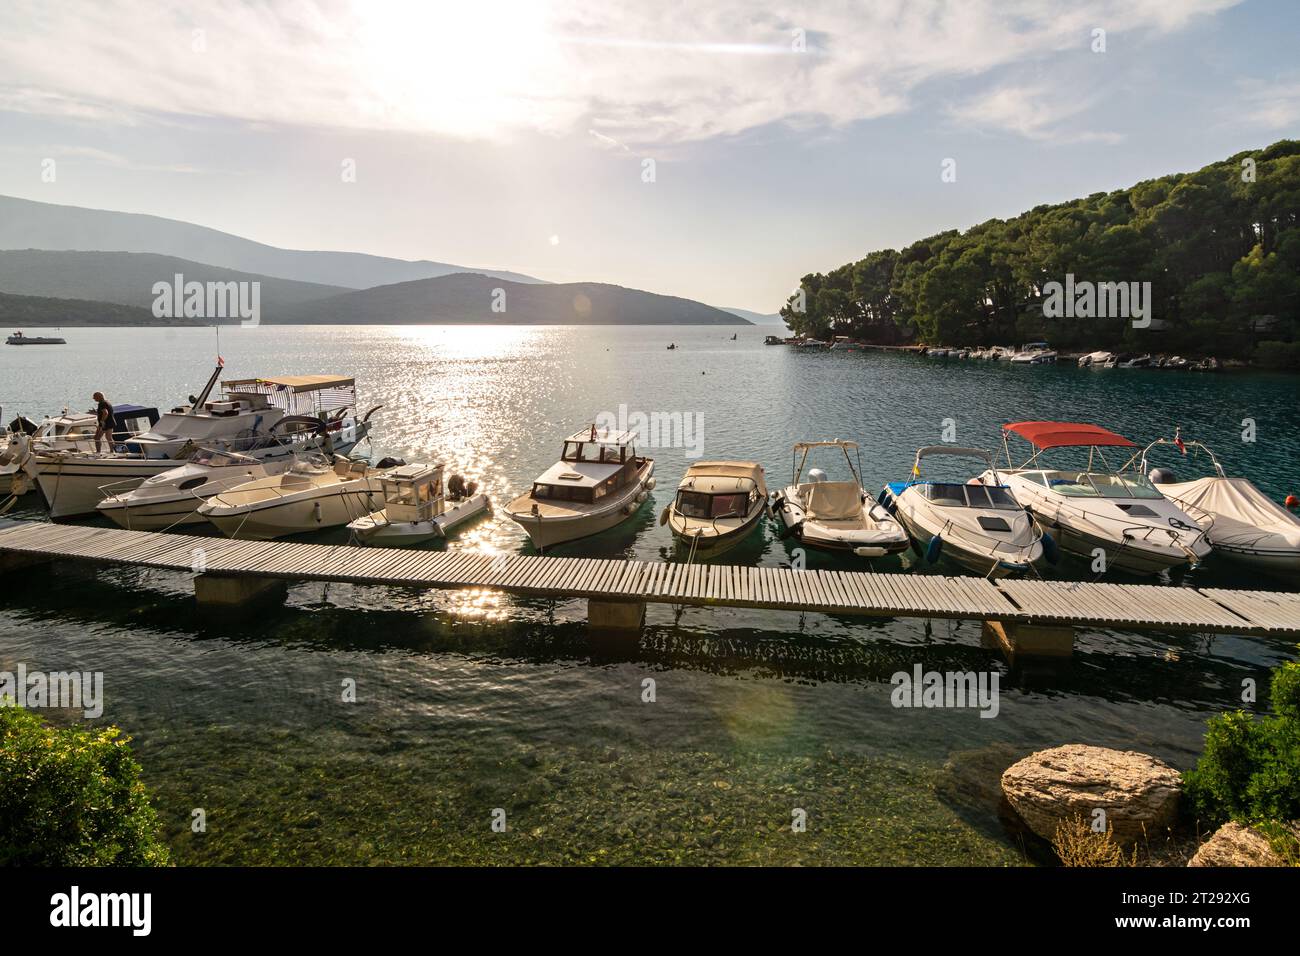 Motorboats at the jetty in picturesque bay (Osor) on the island of Losinj in the Adriatic Sea, Croatia Stock Photo